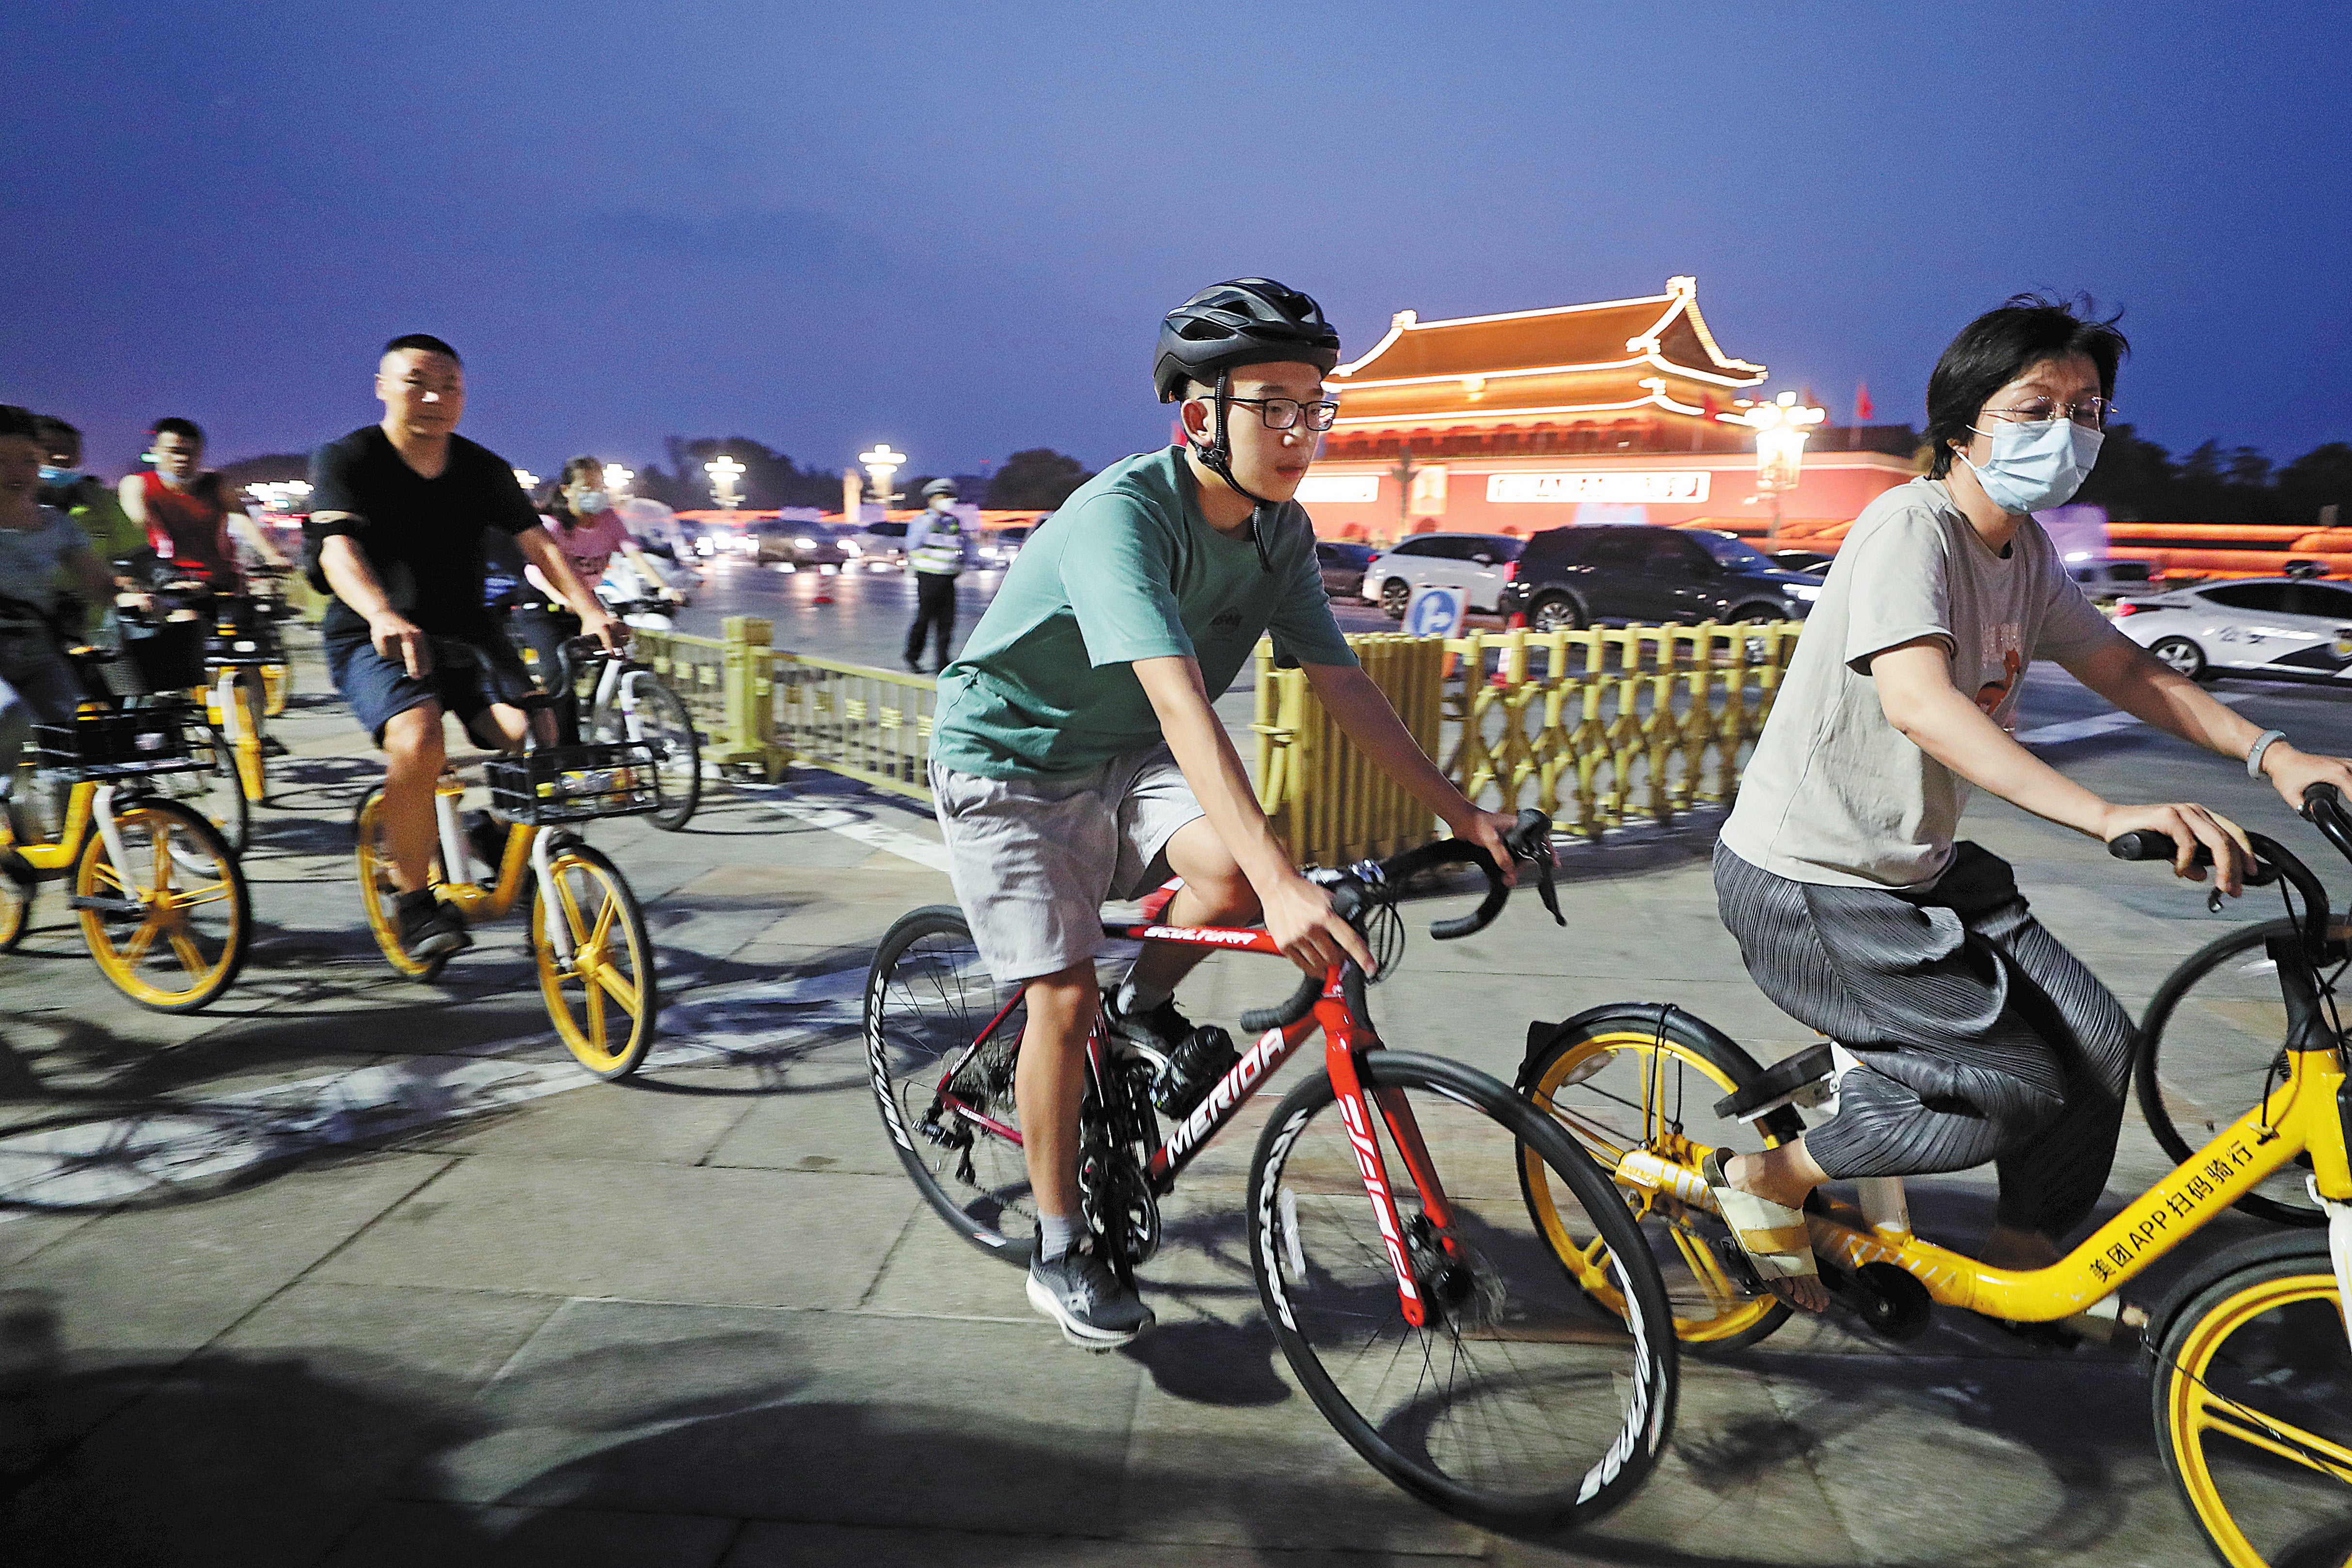 Cyclists pass through Tian’anmen Square in Beijing in July during an evening ride along Chang’an Avenue, where many of them take photos of the area at sunset